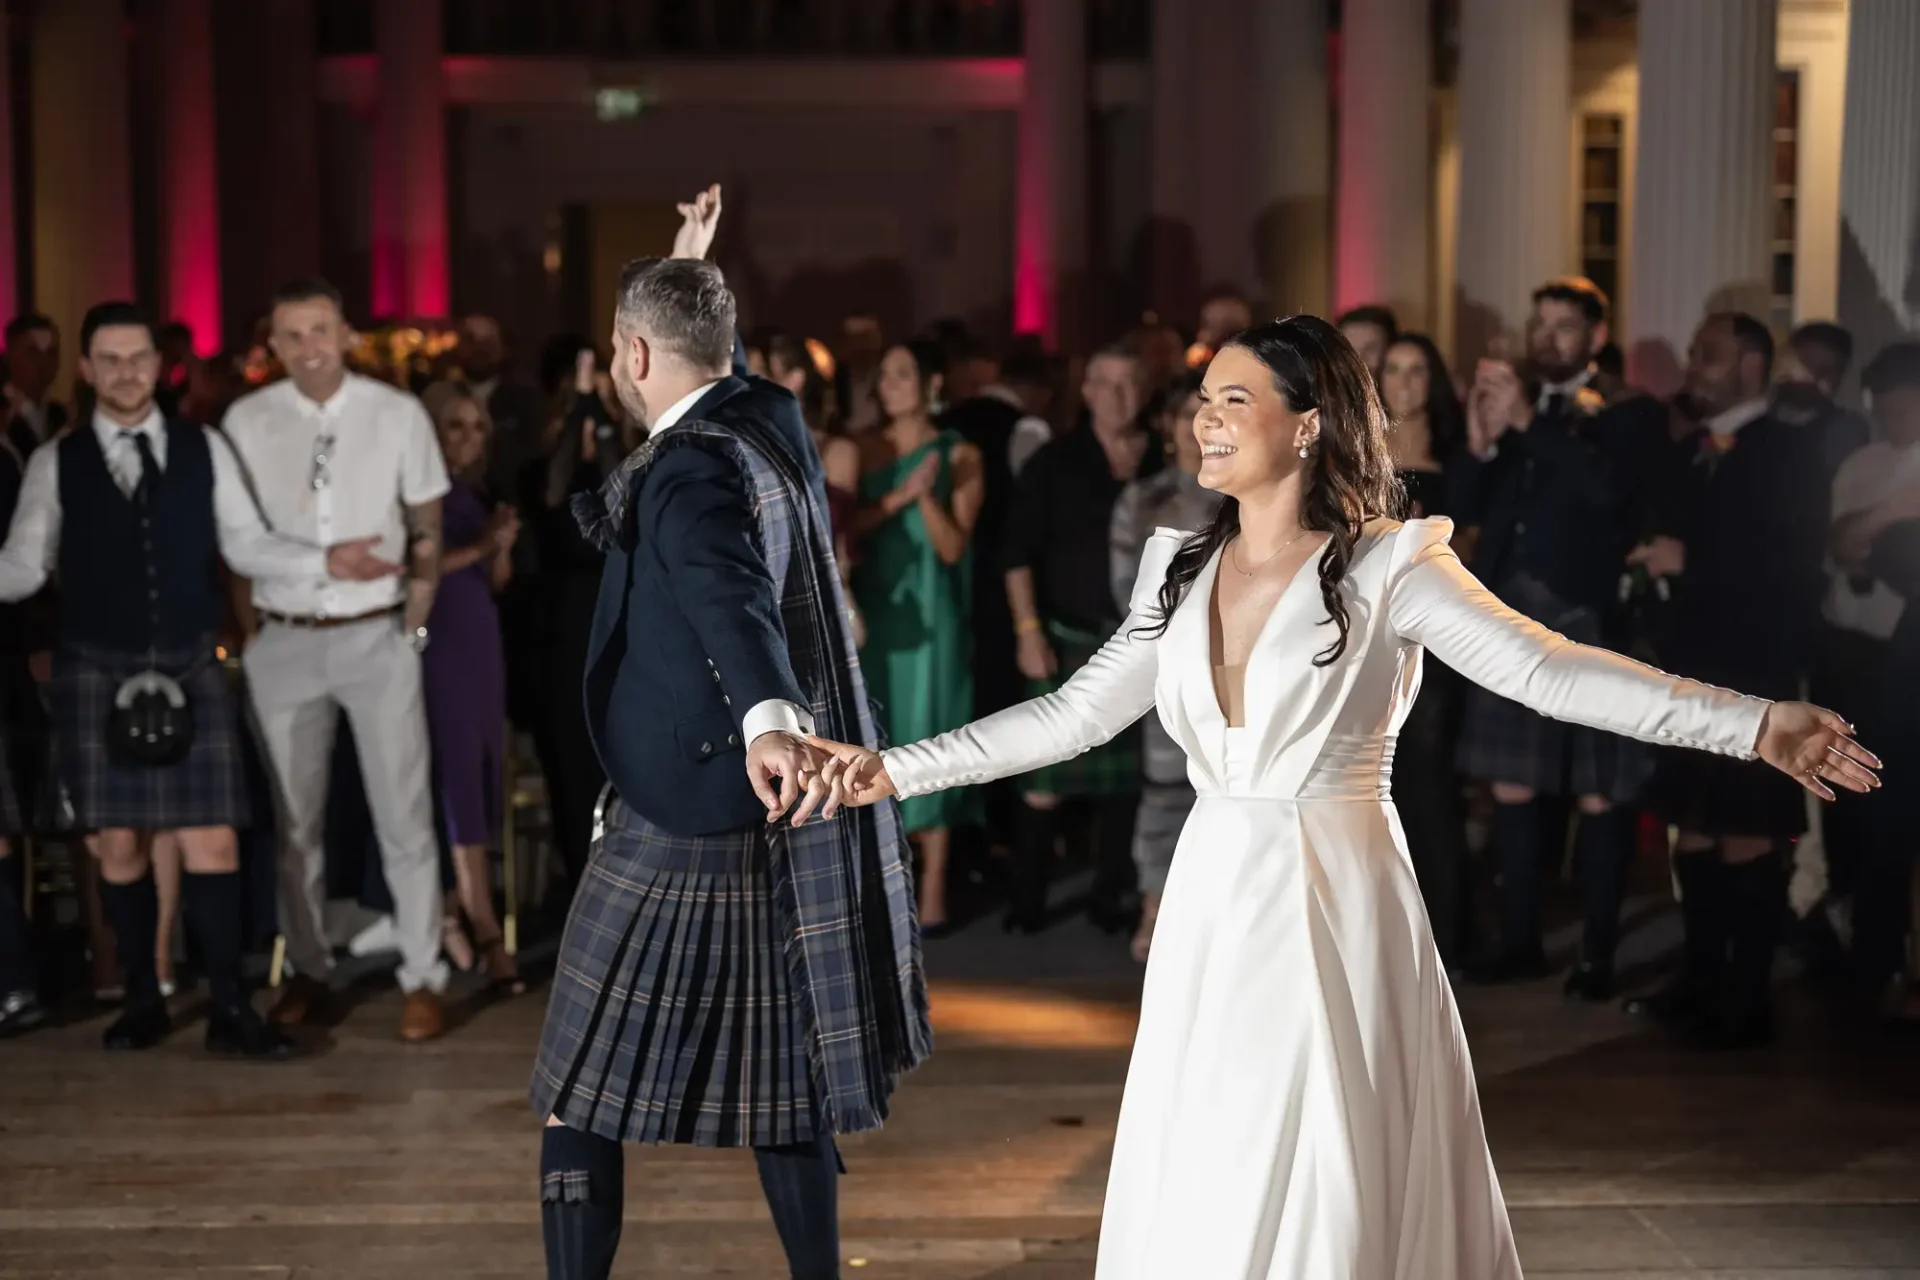 A bride and groom joyfully dance in front of guests at a wedding, with the groom wearing a kilt and the bride in a white dress.